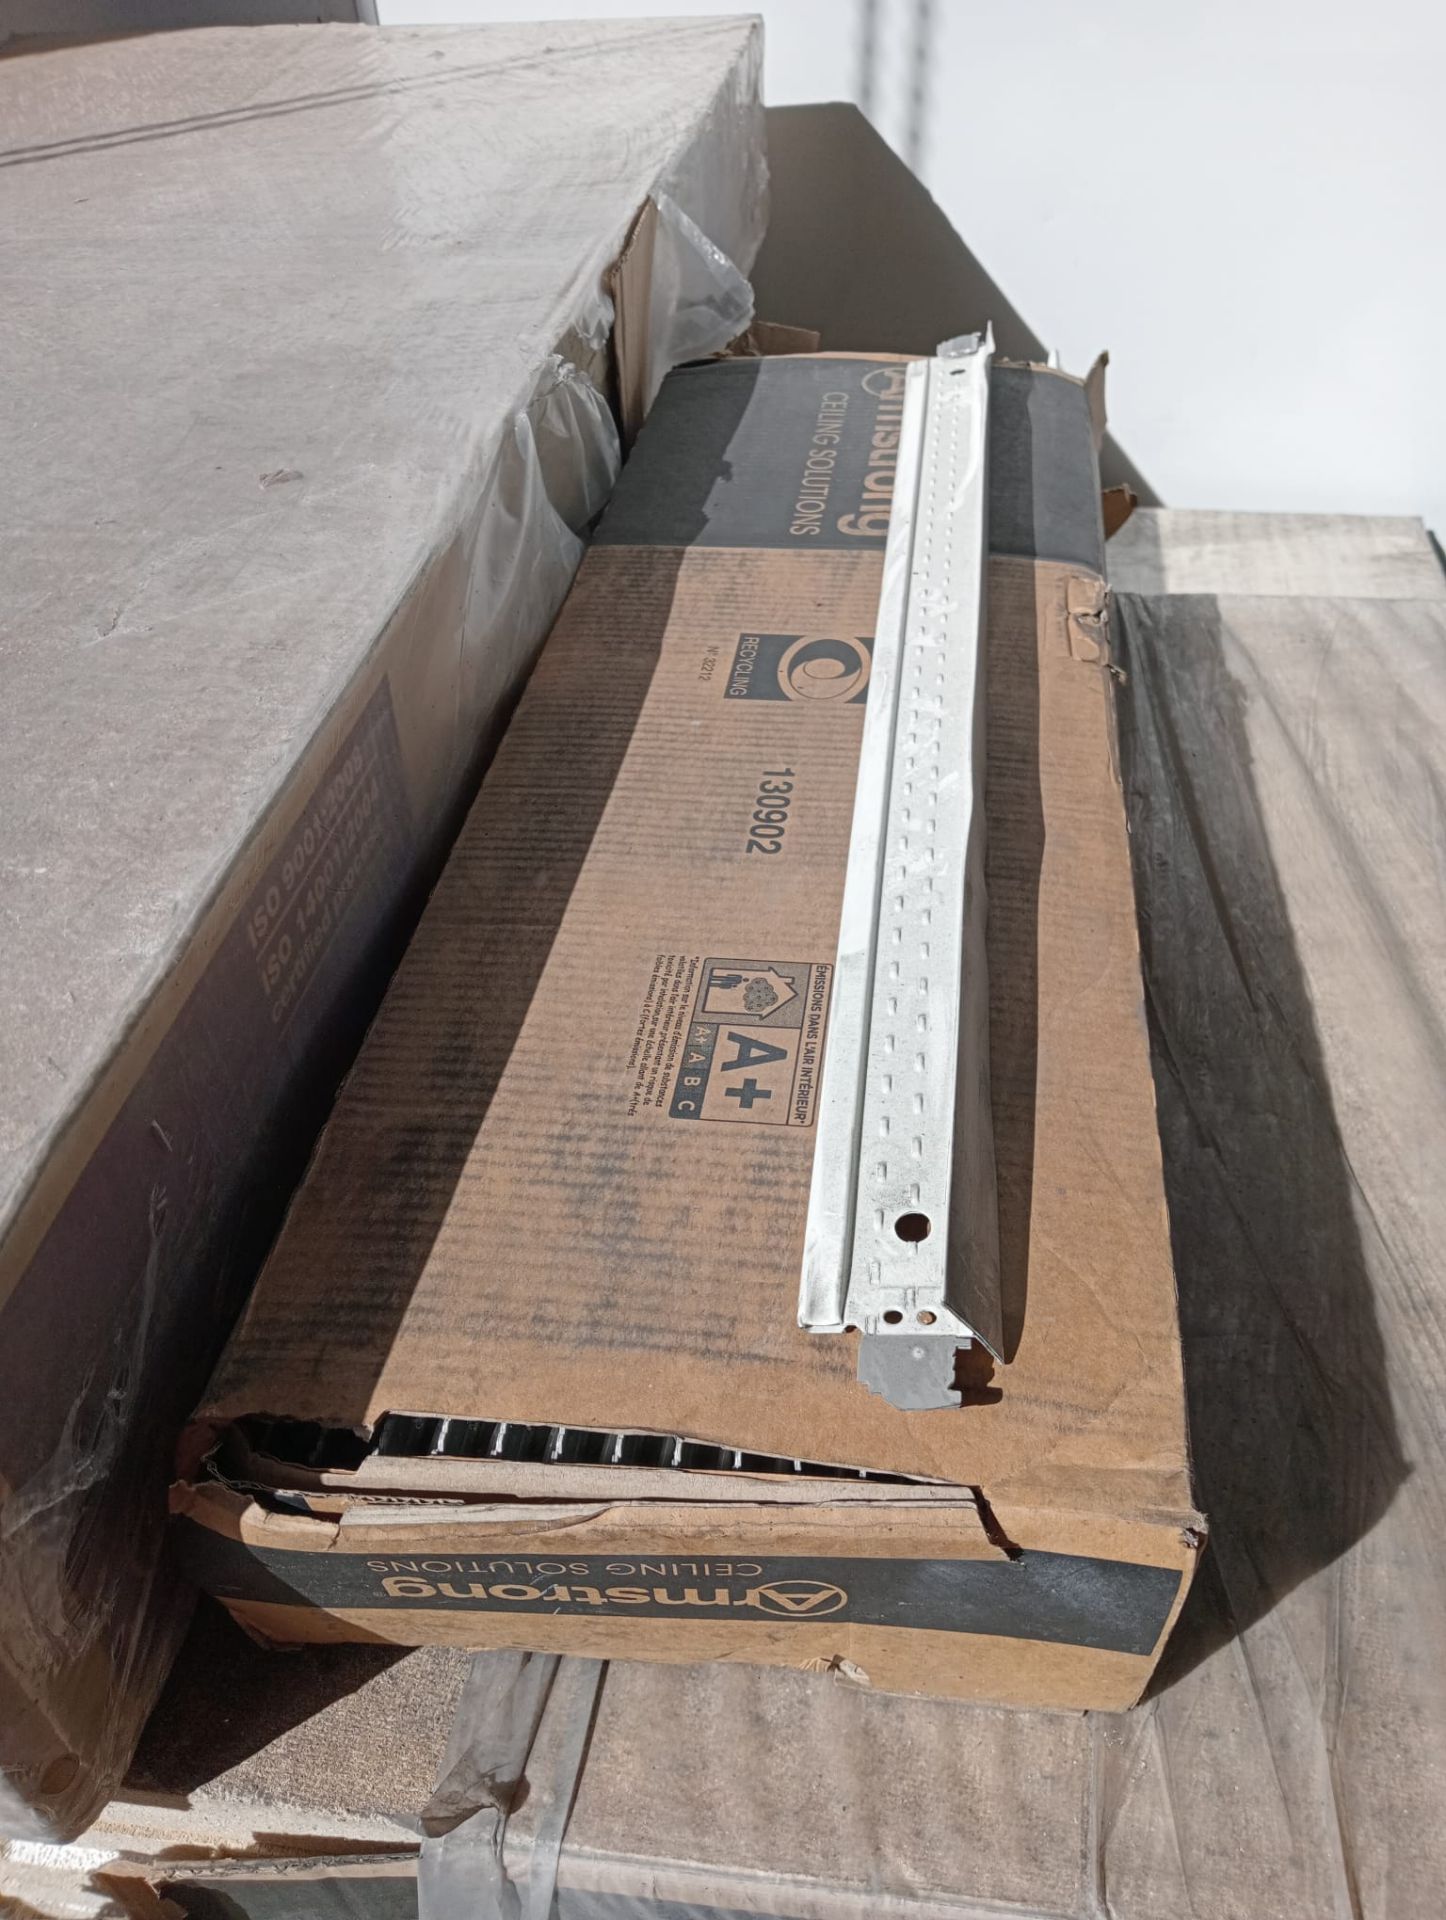 JOBLOT OF ARMSTRONG ACOUSTIC CEILING TILES INC 5461, 9120 AND 2539 - GRADE B - Bild 7 aus 7